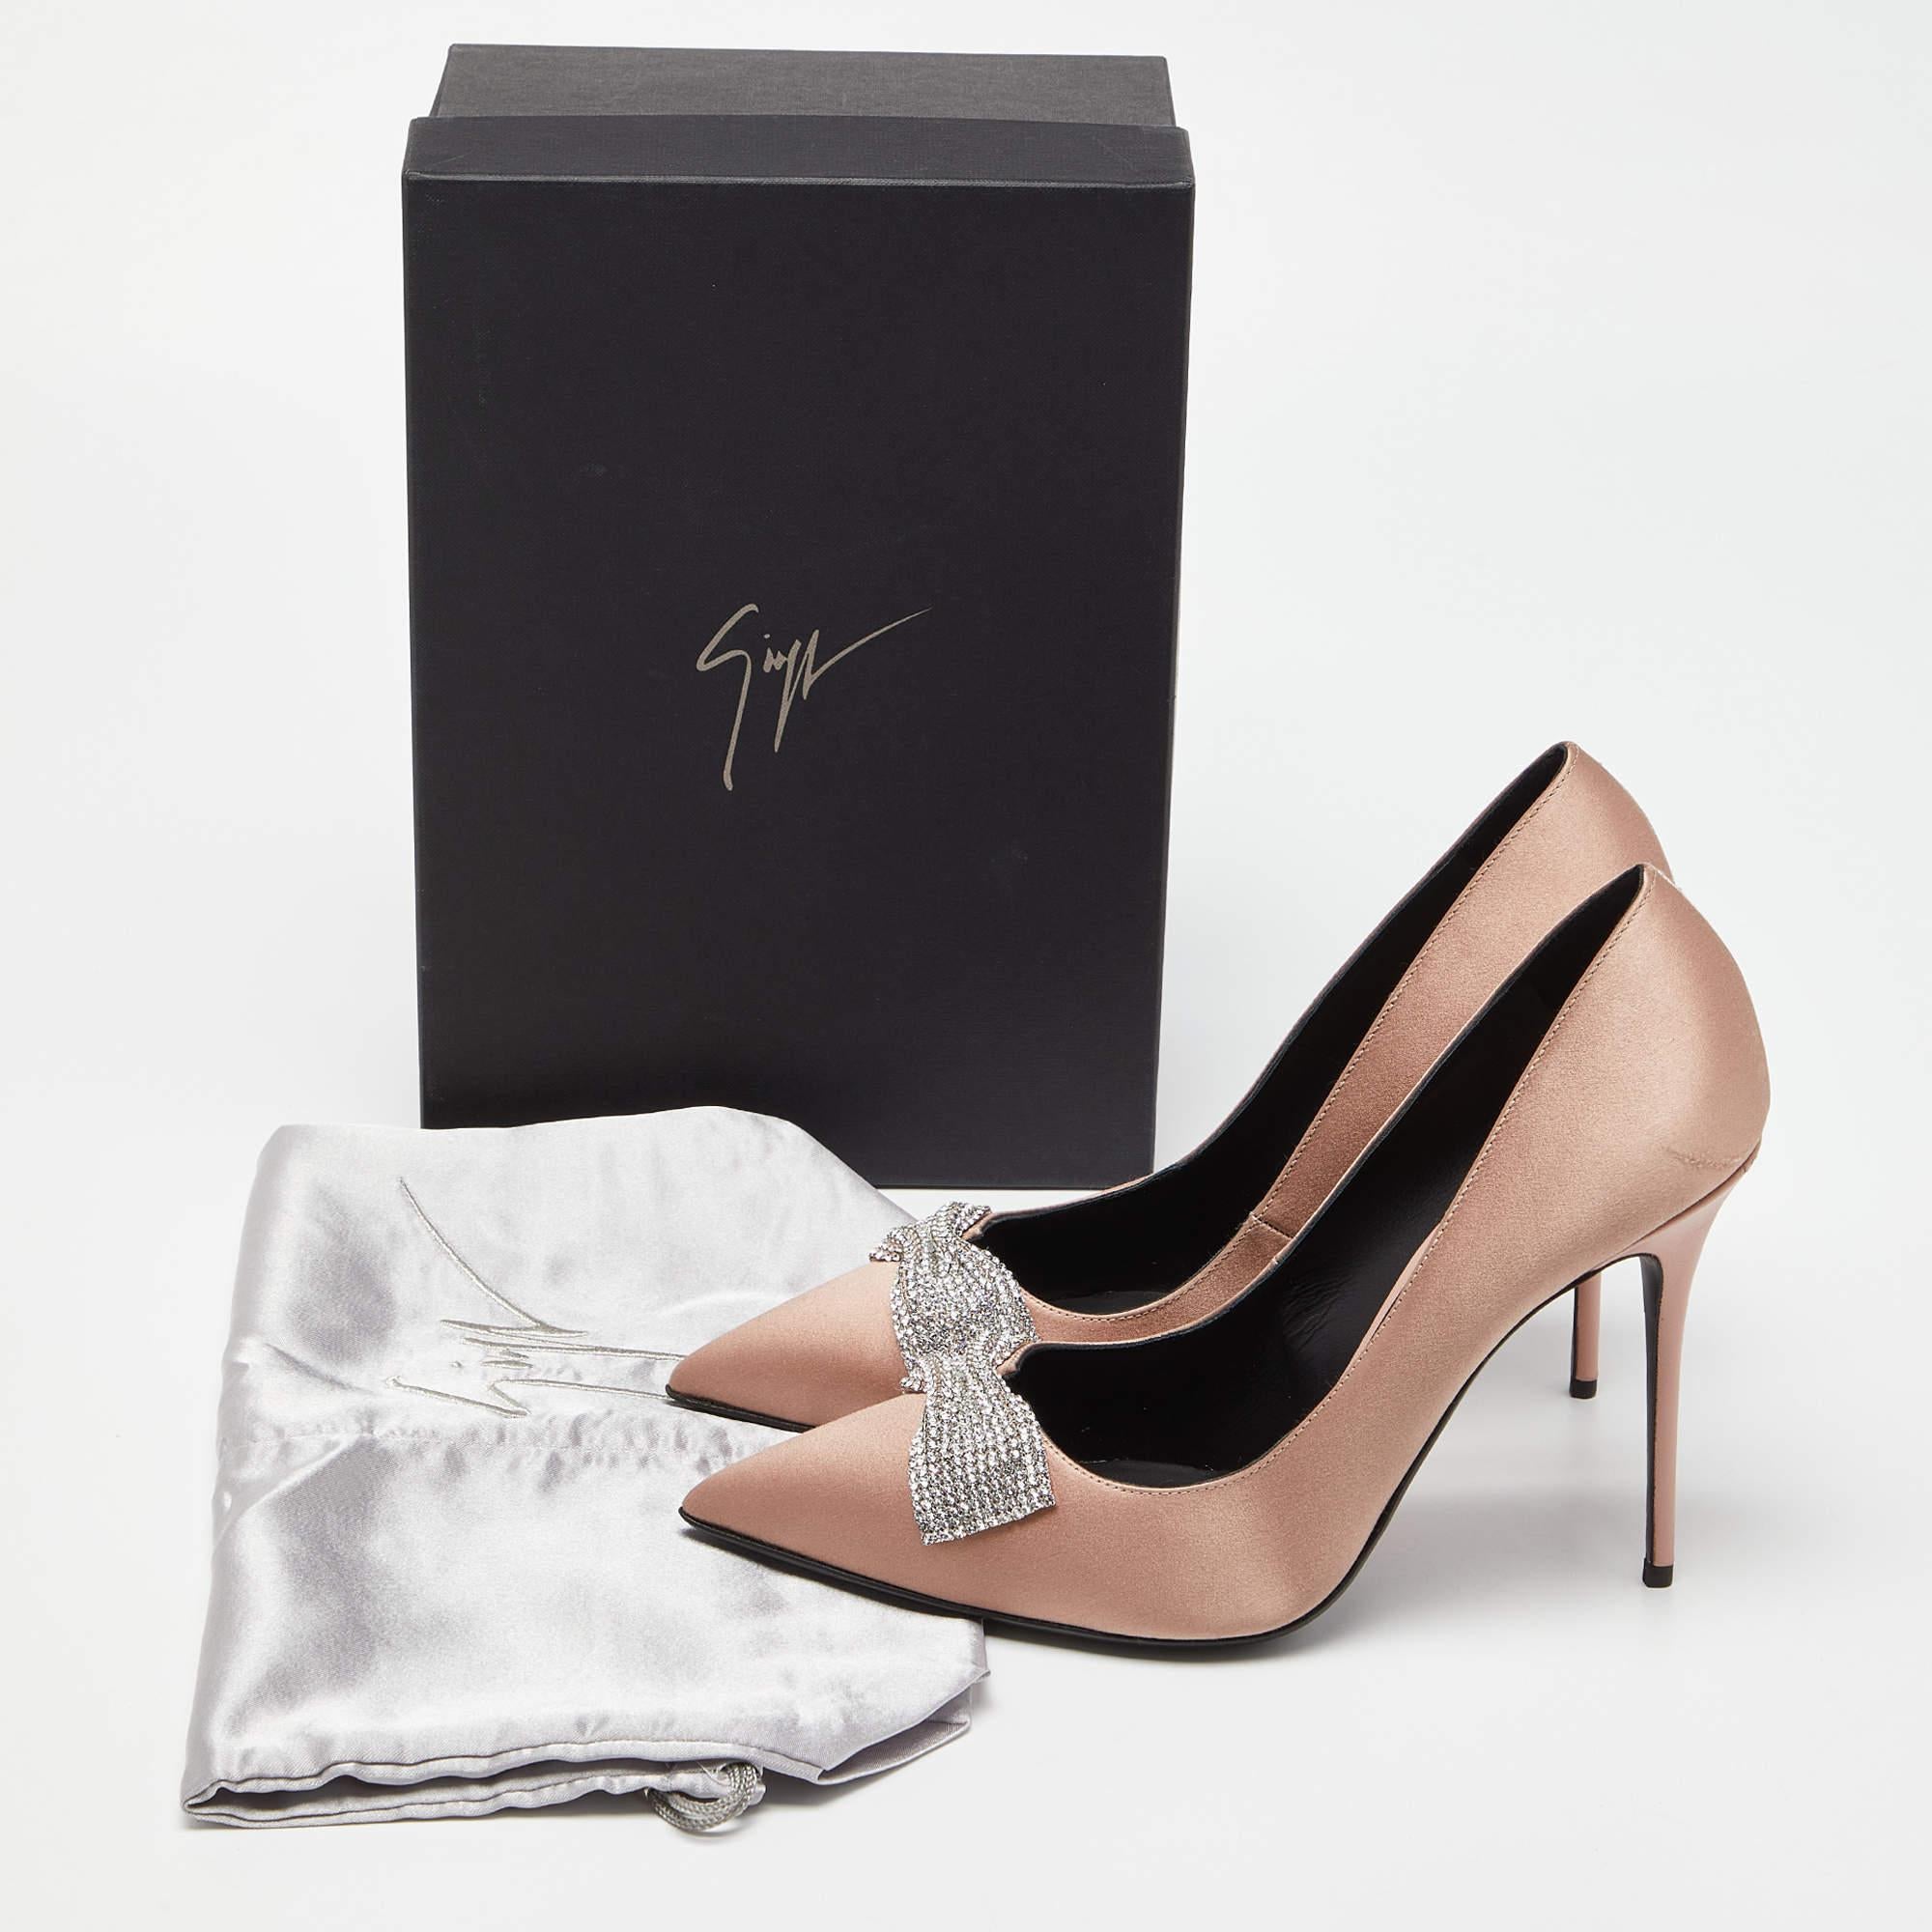 Giuseppe Zanotti Pink Satin and Leather Crystals Embellished Lucrezia Pumps Size For Sale 5